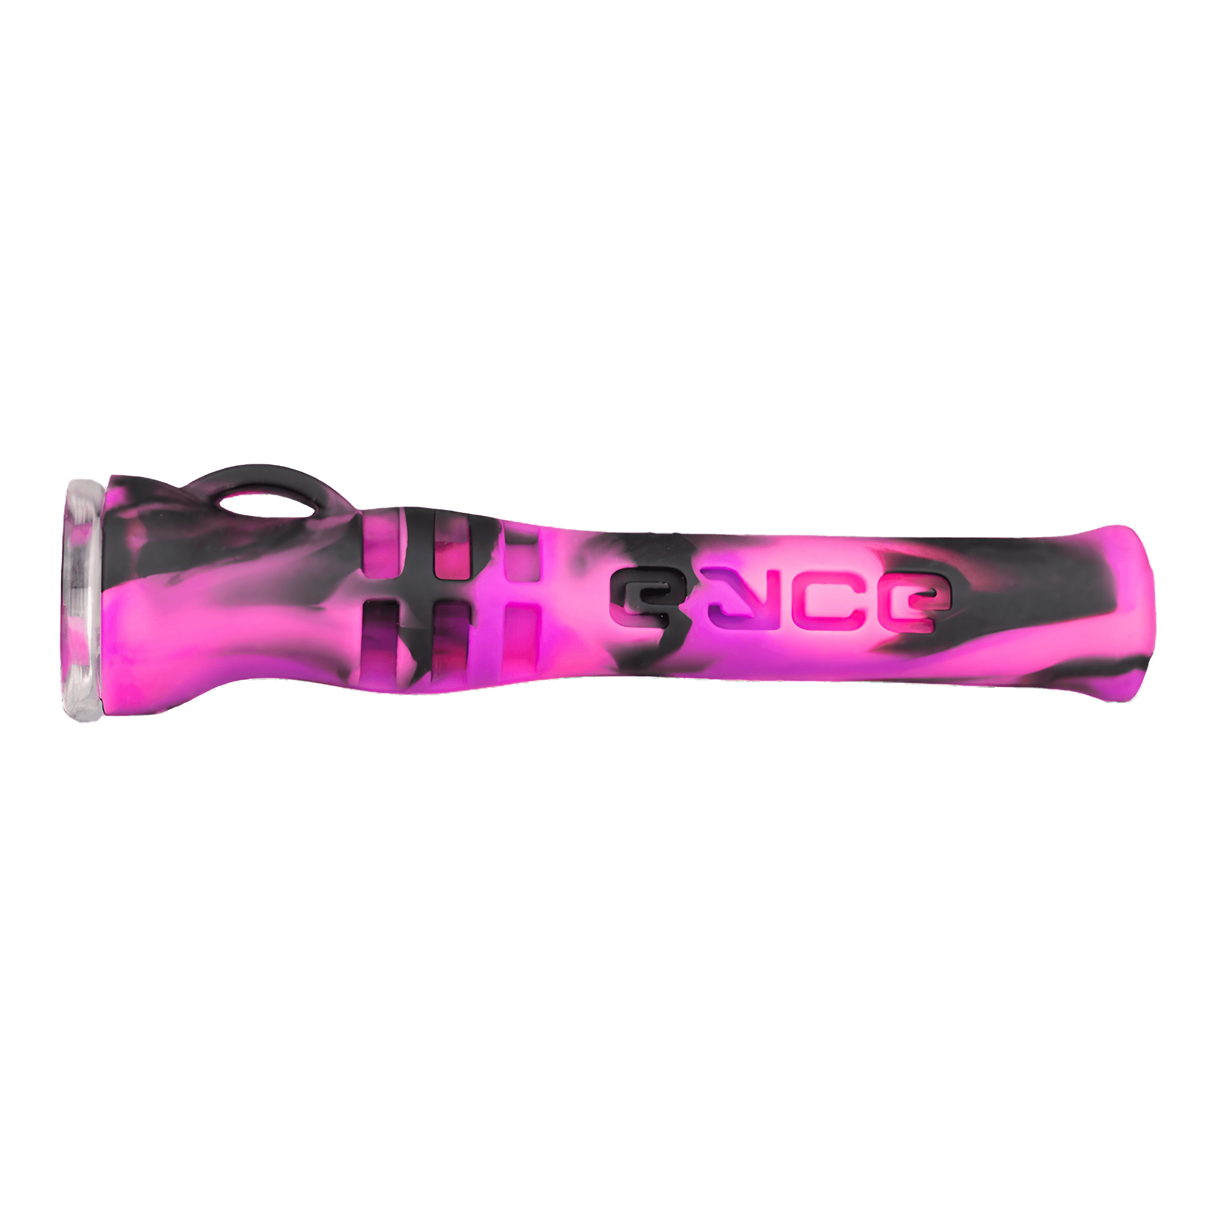 Eyce Shorty Taster in vibrant pink silicone, portable one-hitter pipe, side view on white background